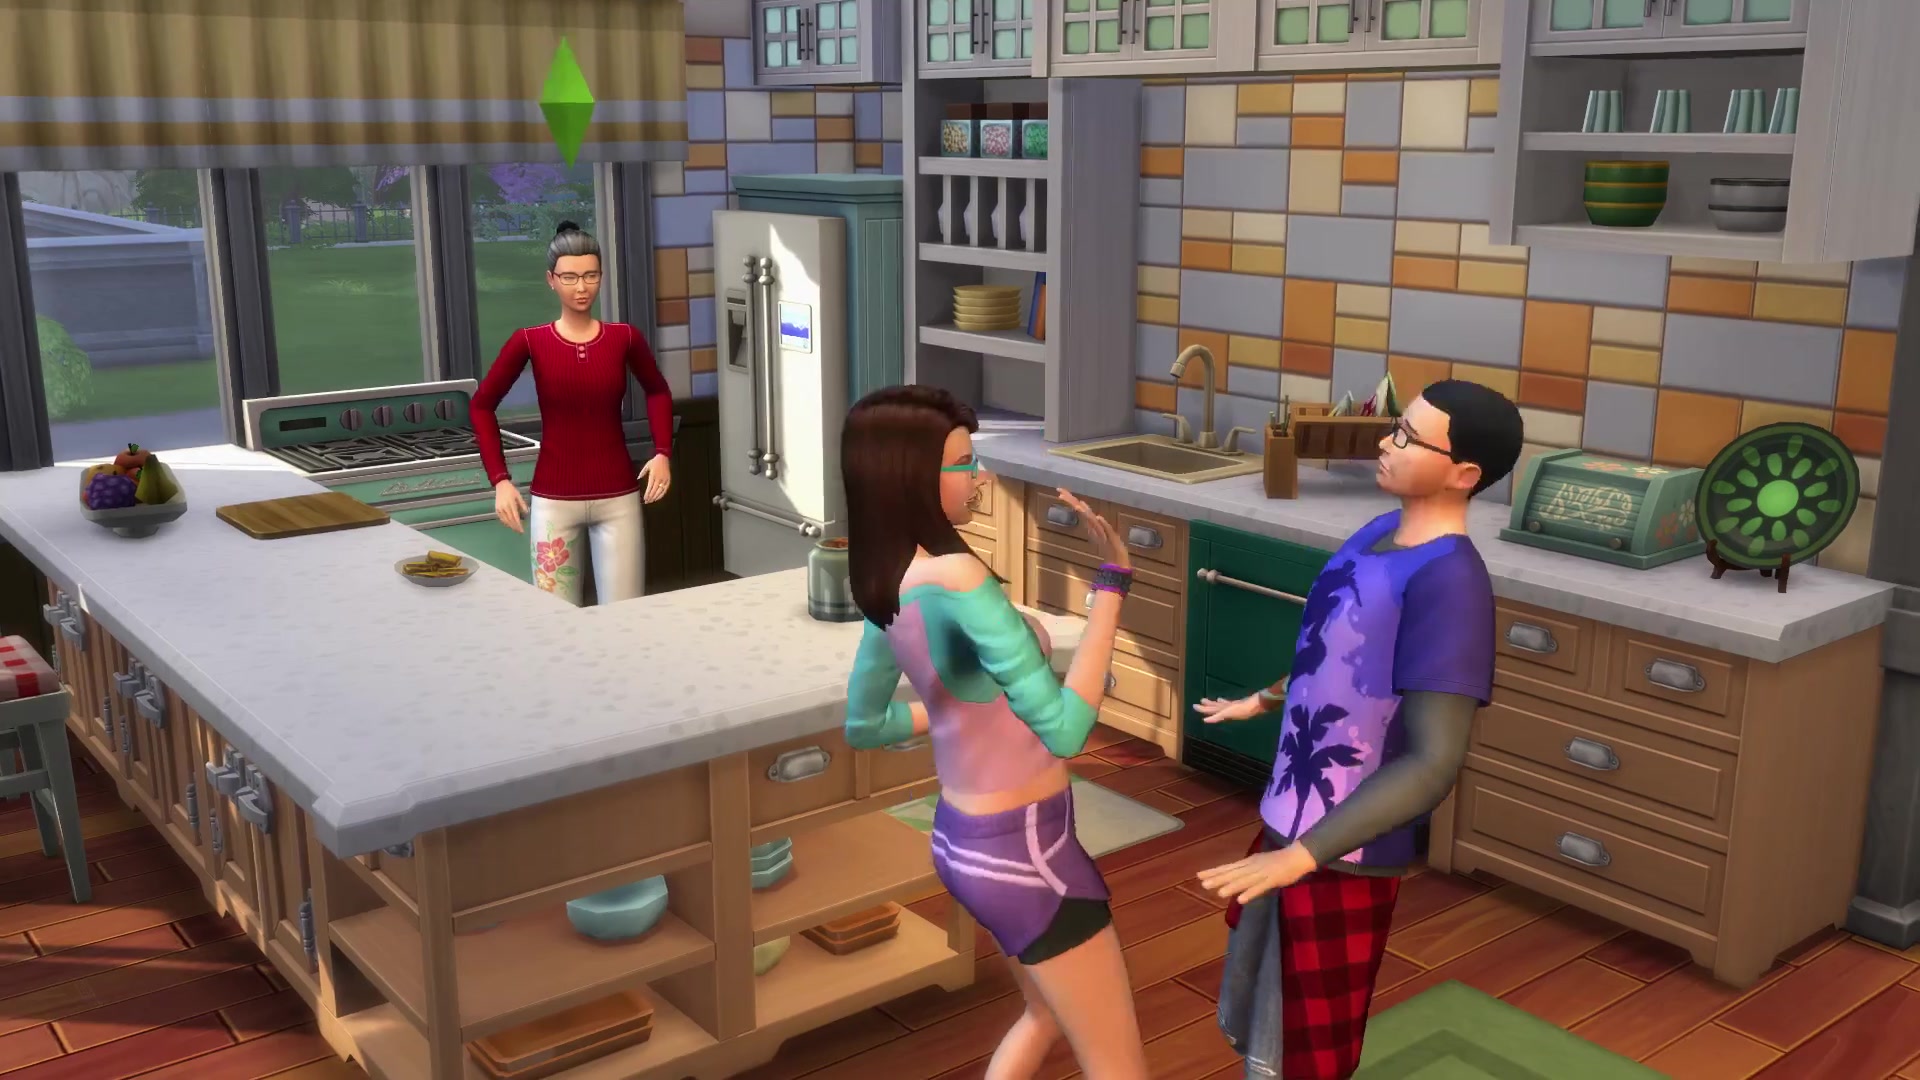 The Sims 4 Parenthood- Parenting Official Gameplay Trailer ...